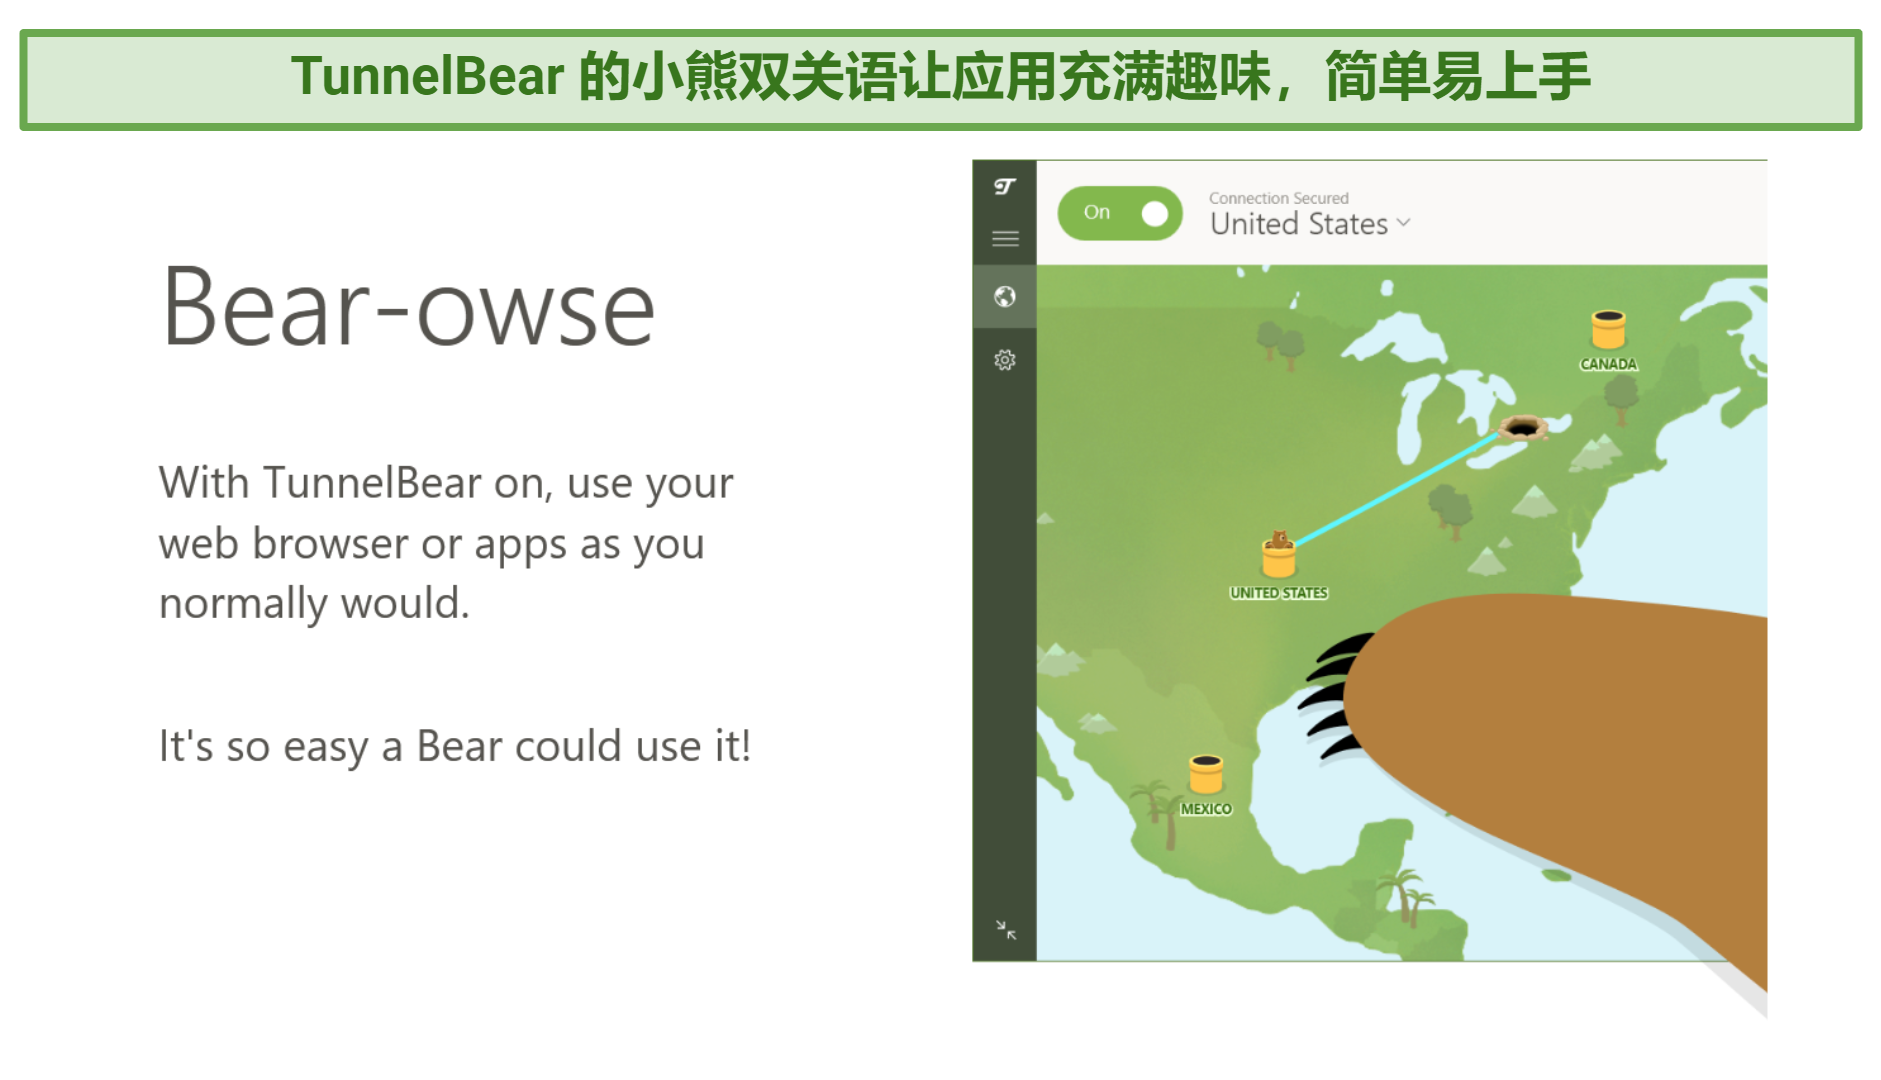 Screenshot showing part of the tutorial after installing TunnelBear